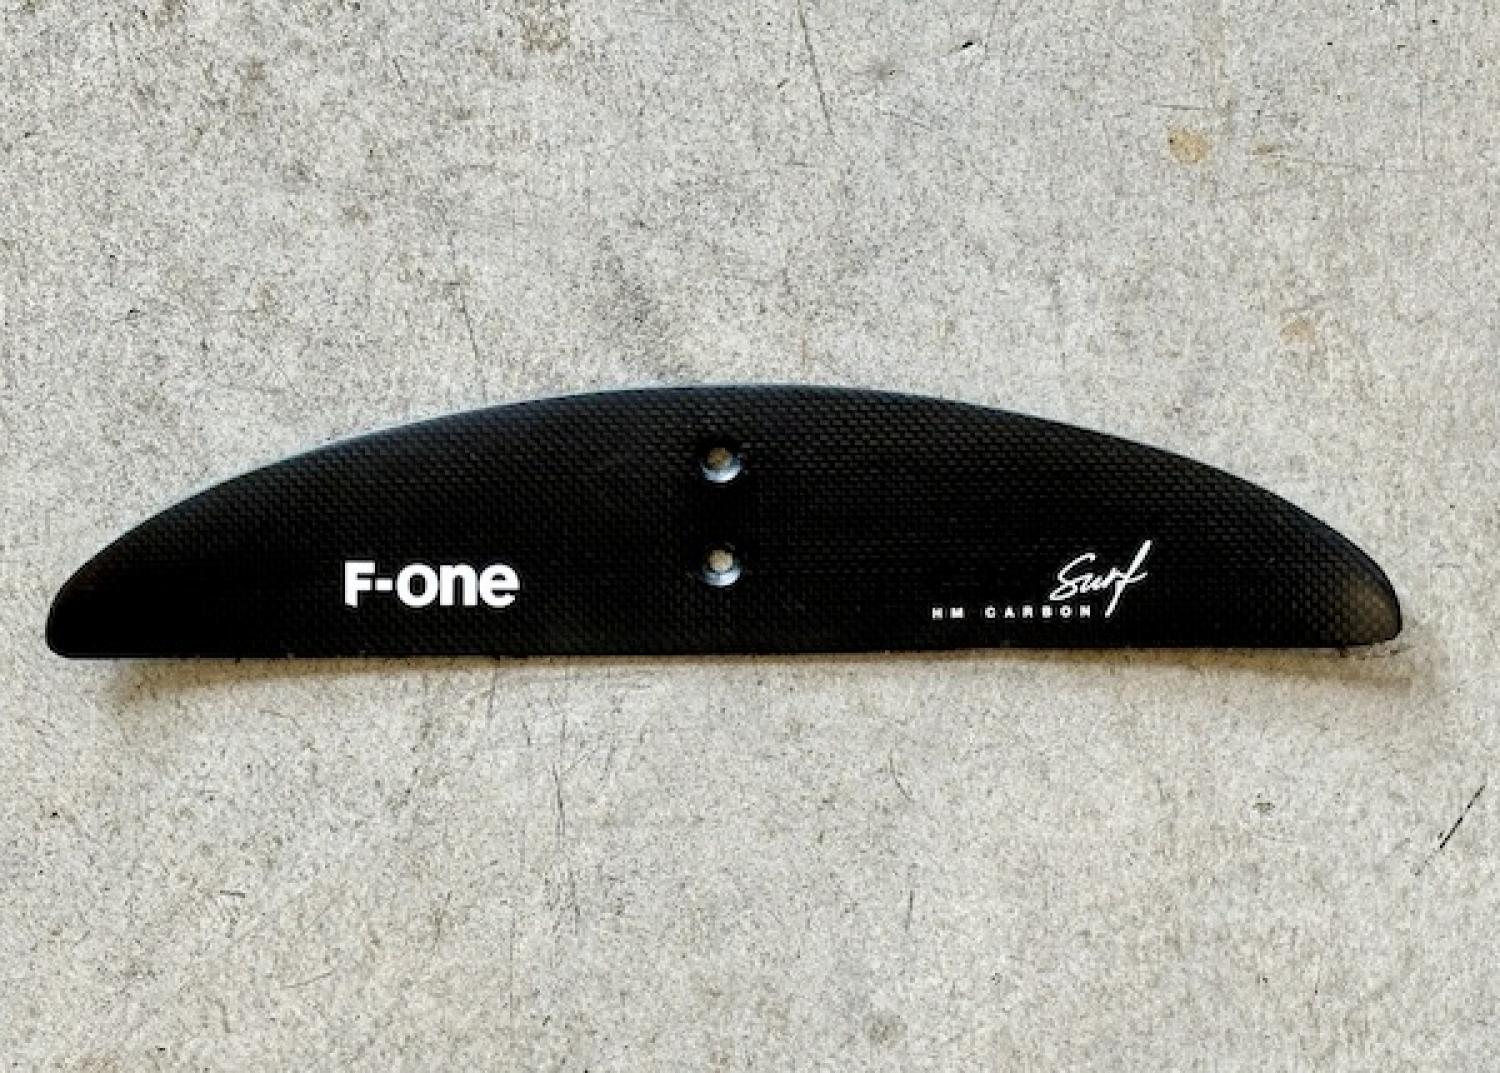 USED F-ONE STAB C250 SURF